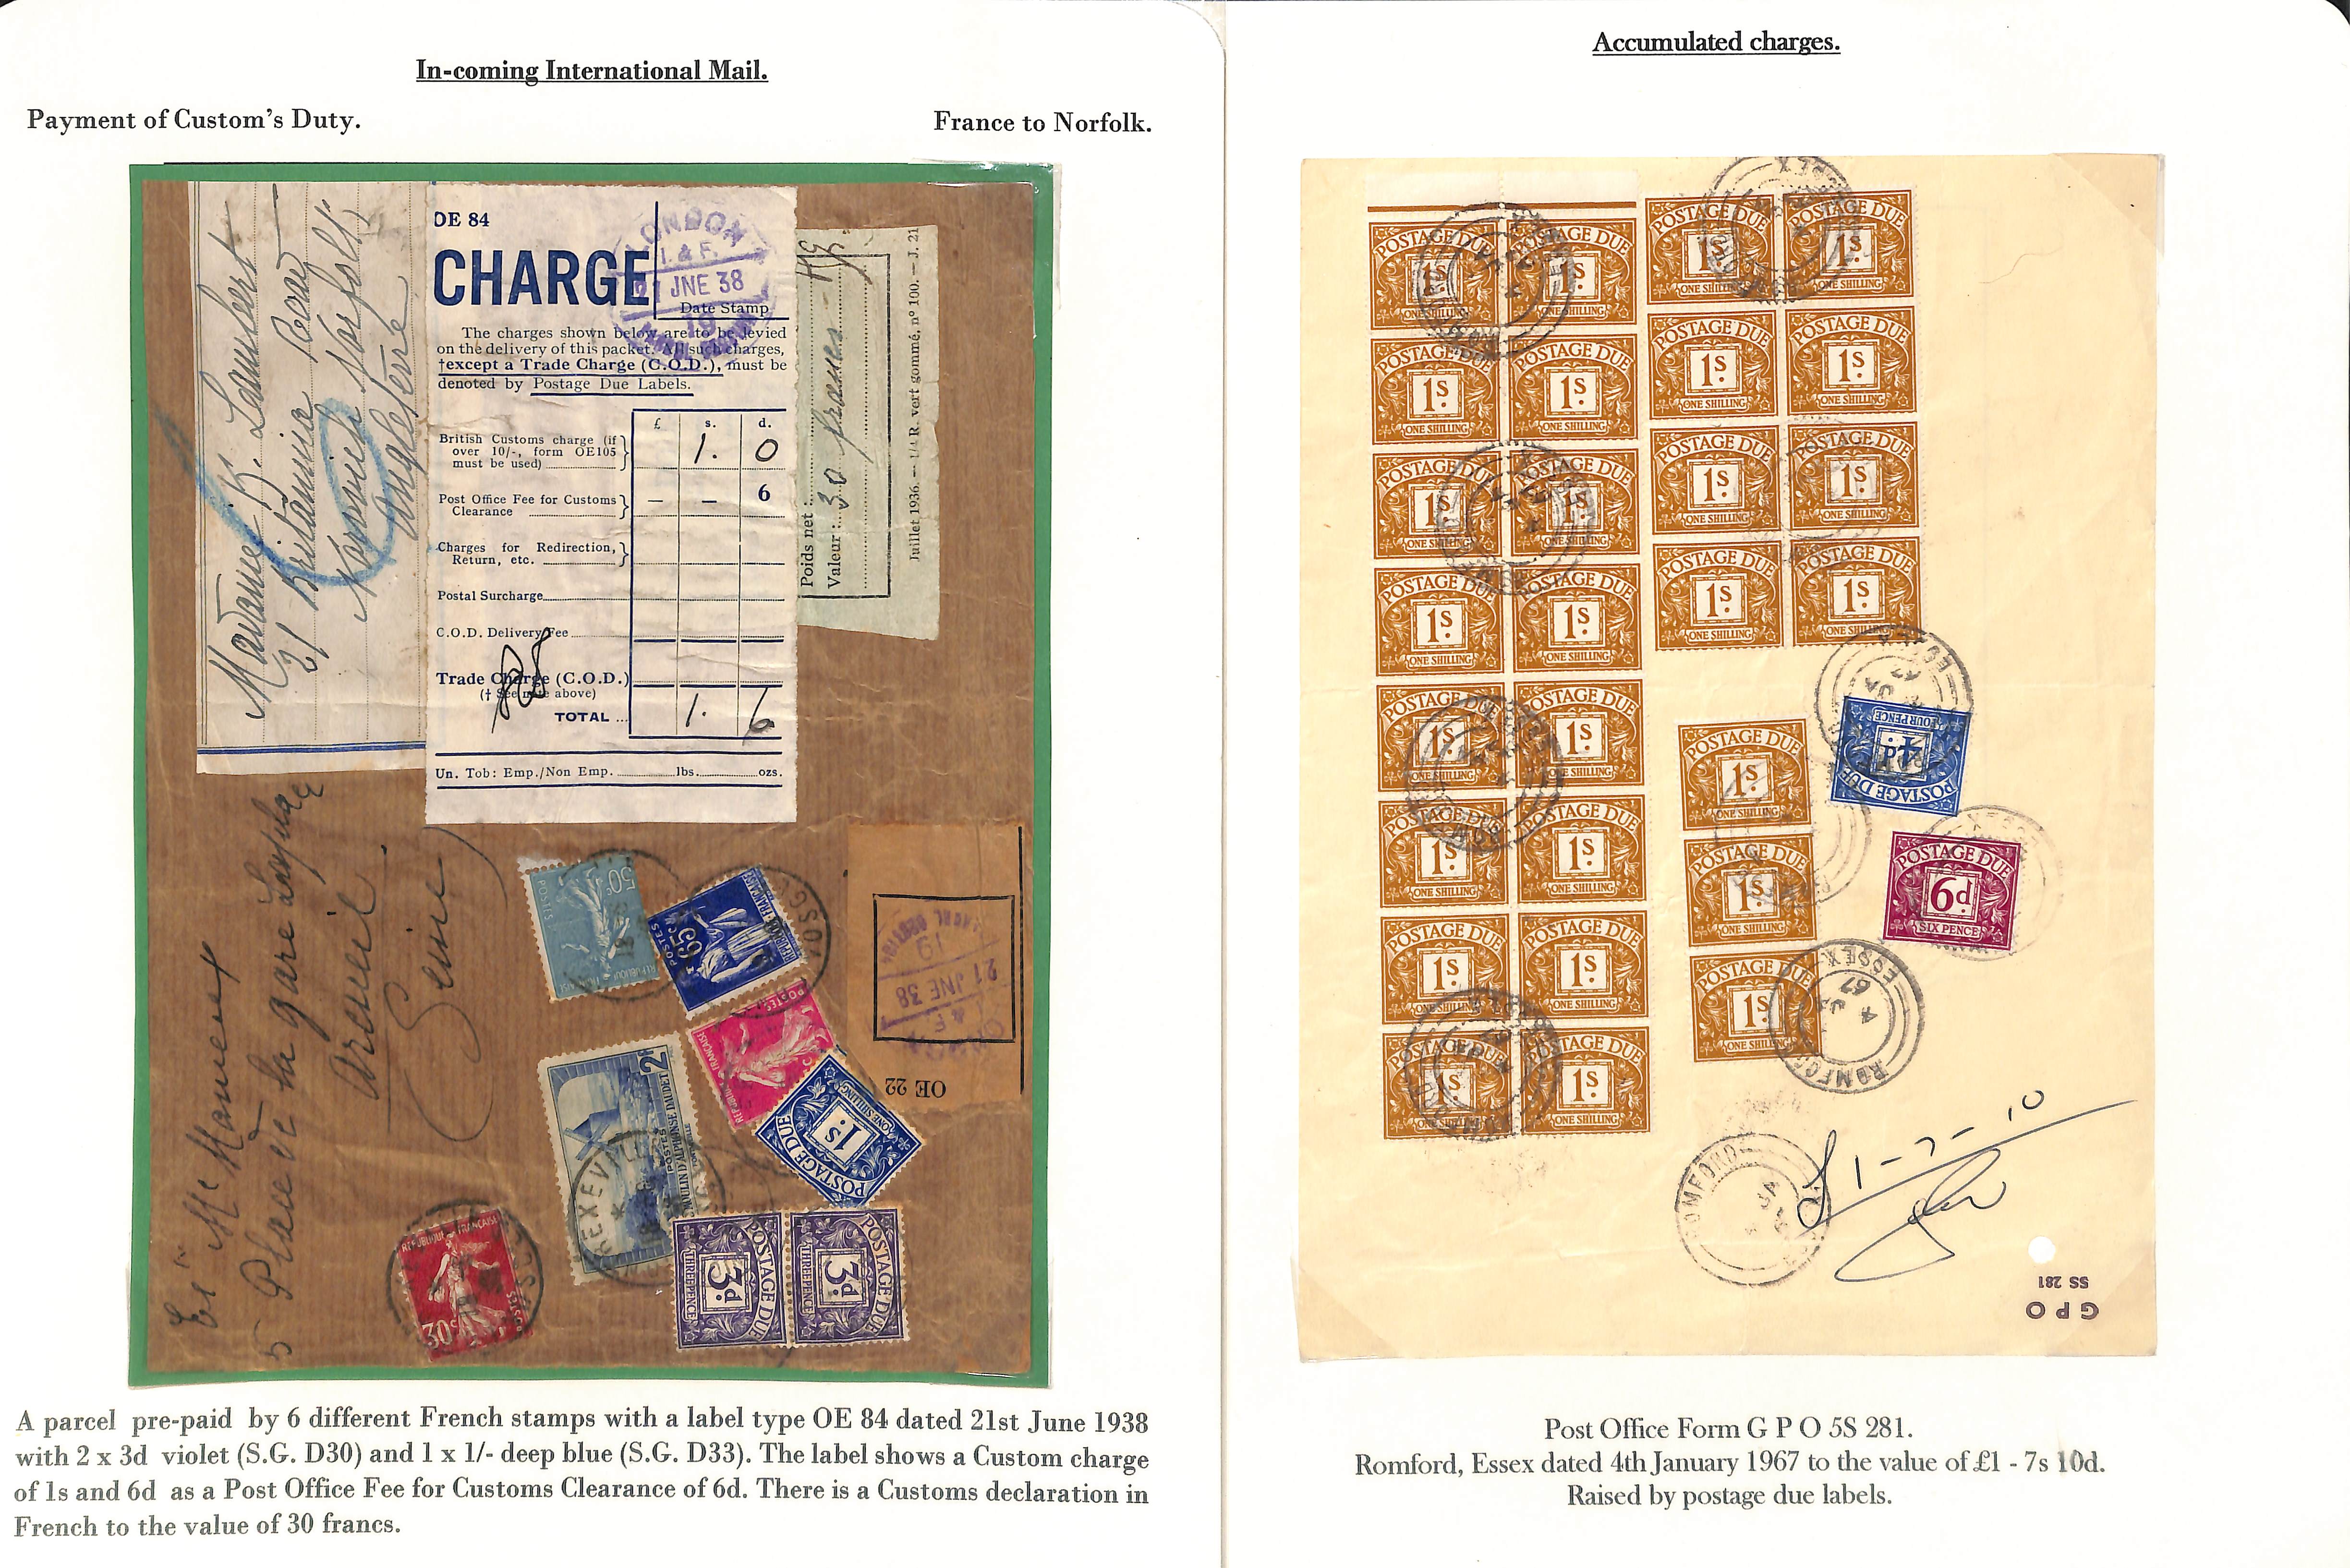 Customs Charges/Accumulated Charges. 1938-92 Covers or parcel address panels with customs duty or - Image 13 of 18